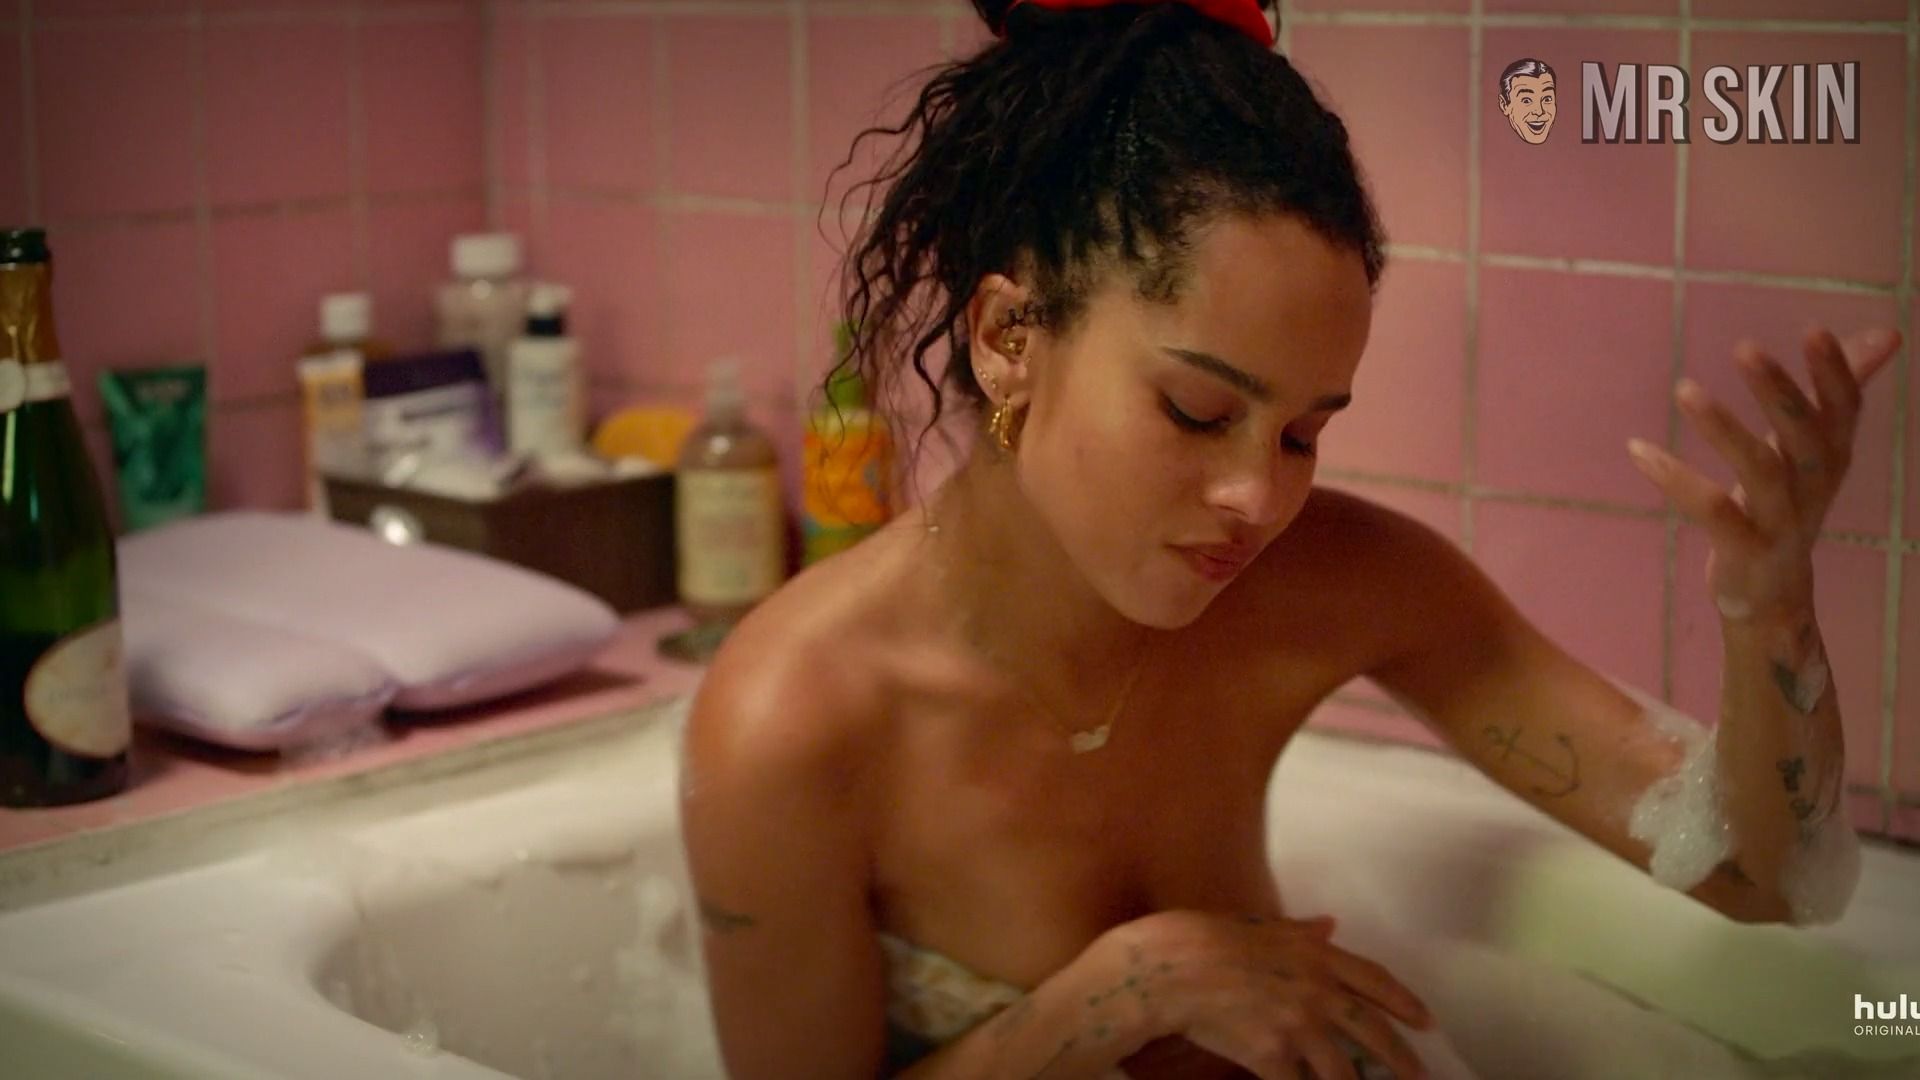 Zoë Kravitz High Fidelity Beams We Real Sex And More At